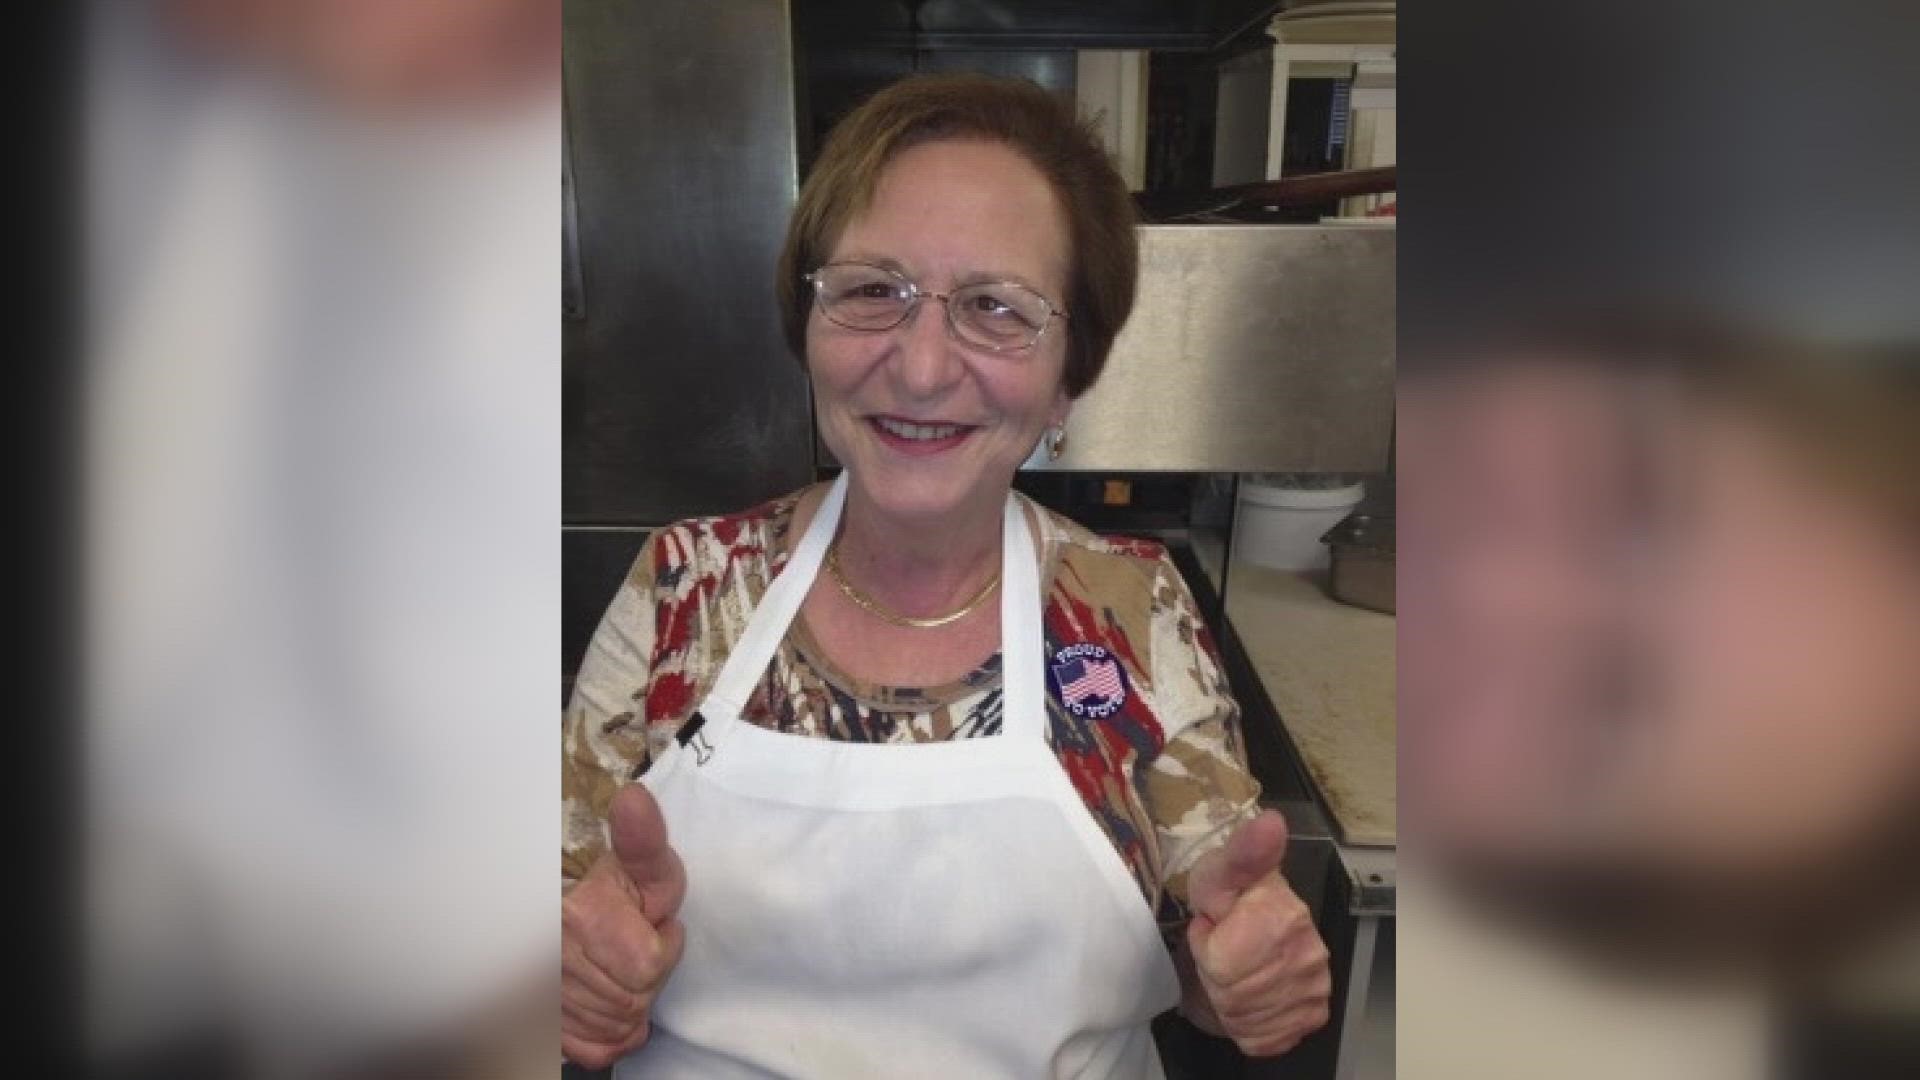 After nearly 30 years in business, Lena's Pizza & Italian Restaurant, family, friends, and community said their goodbyes but will keep Lena's spirit alive.